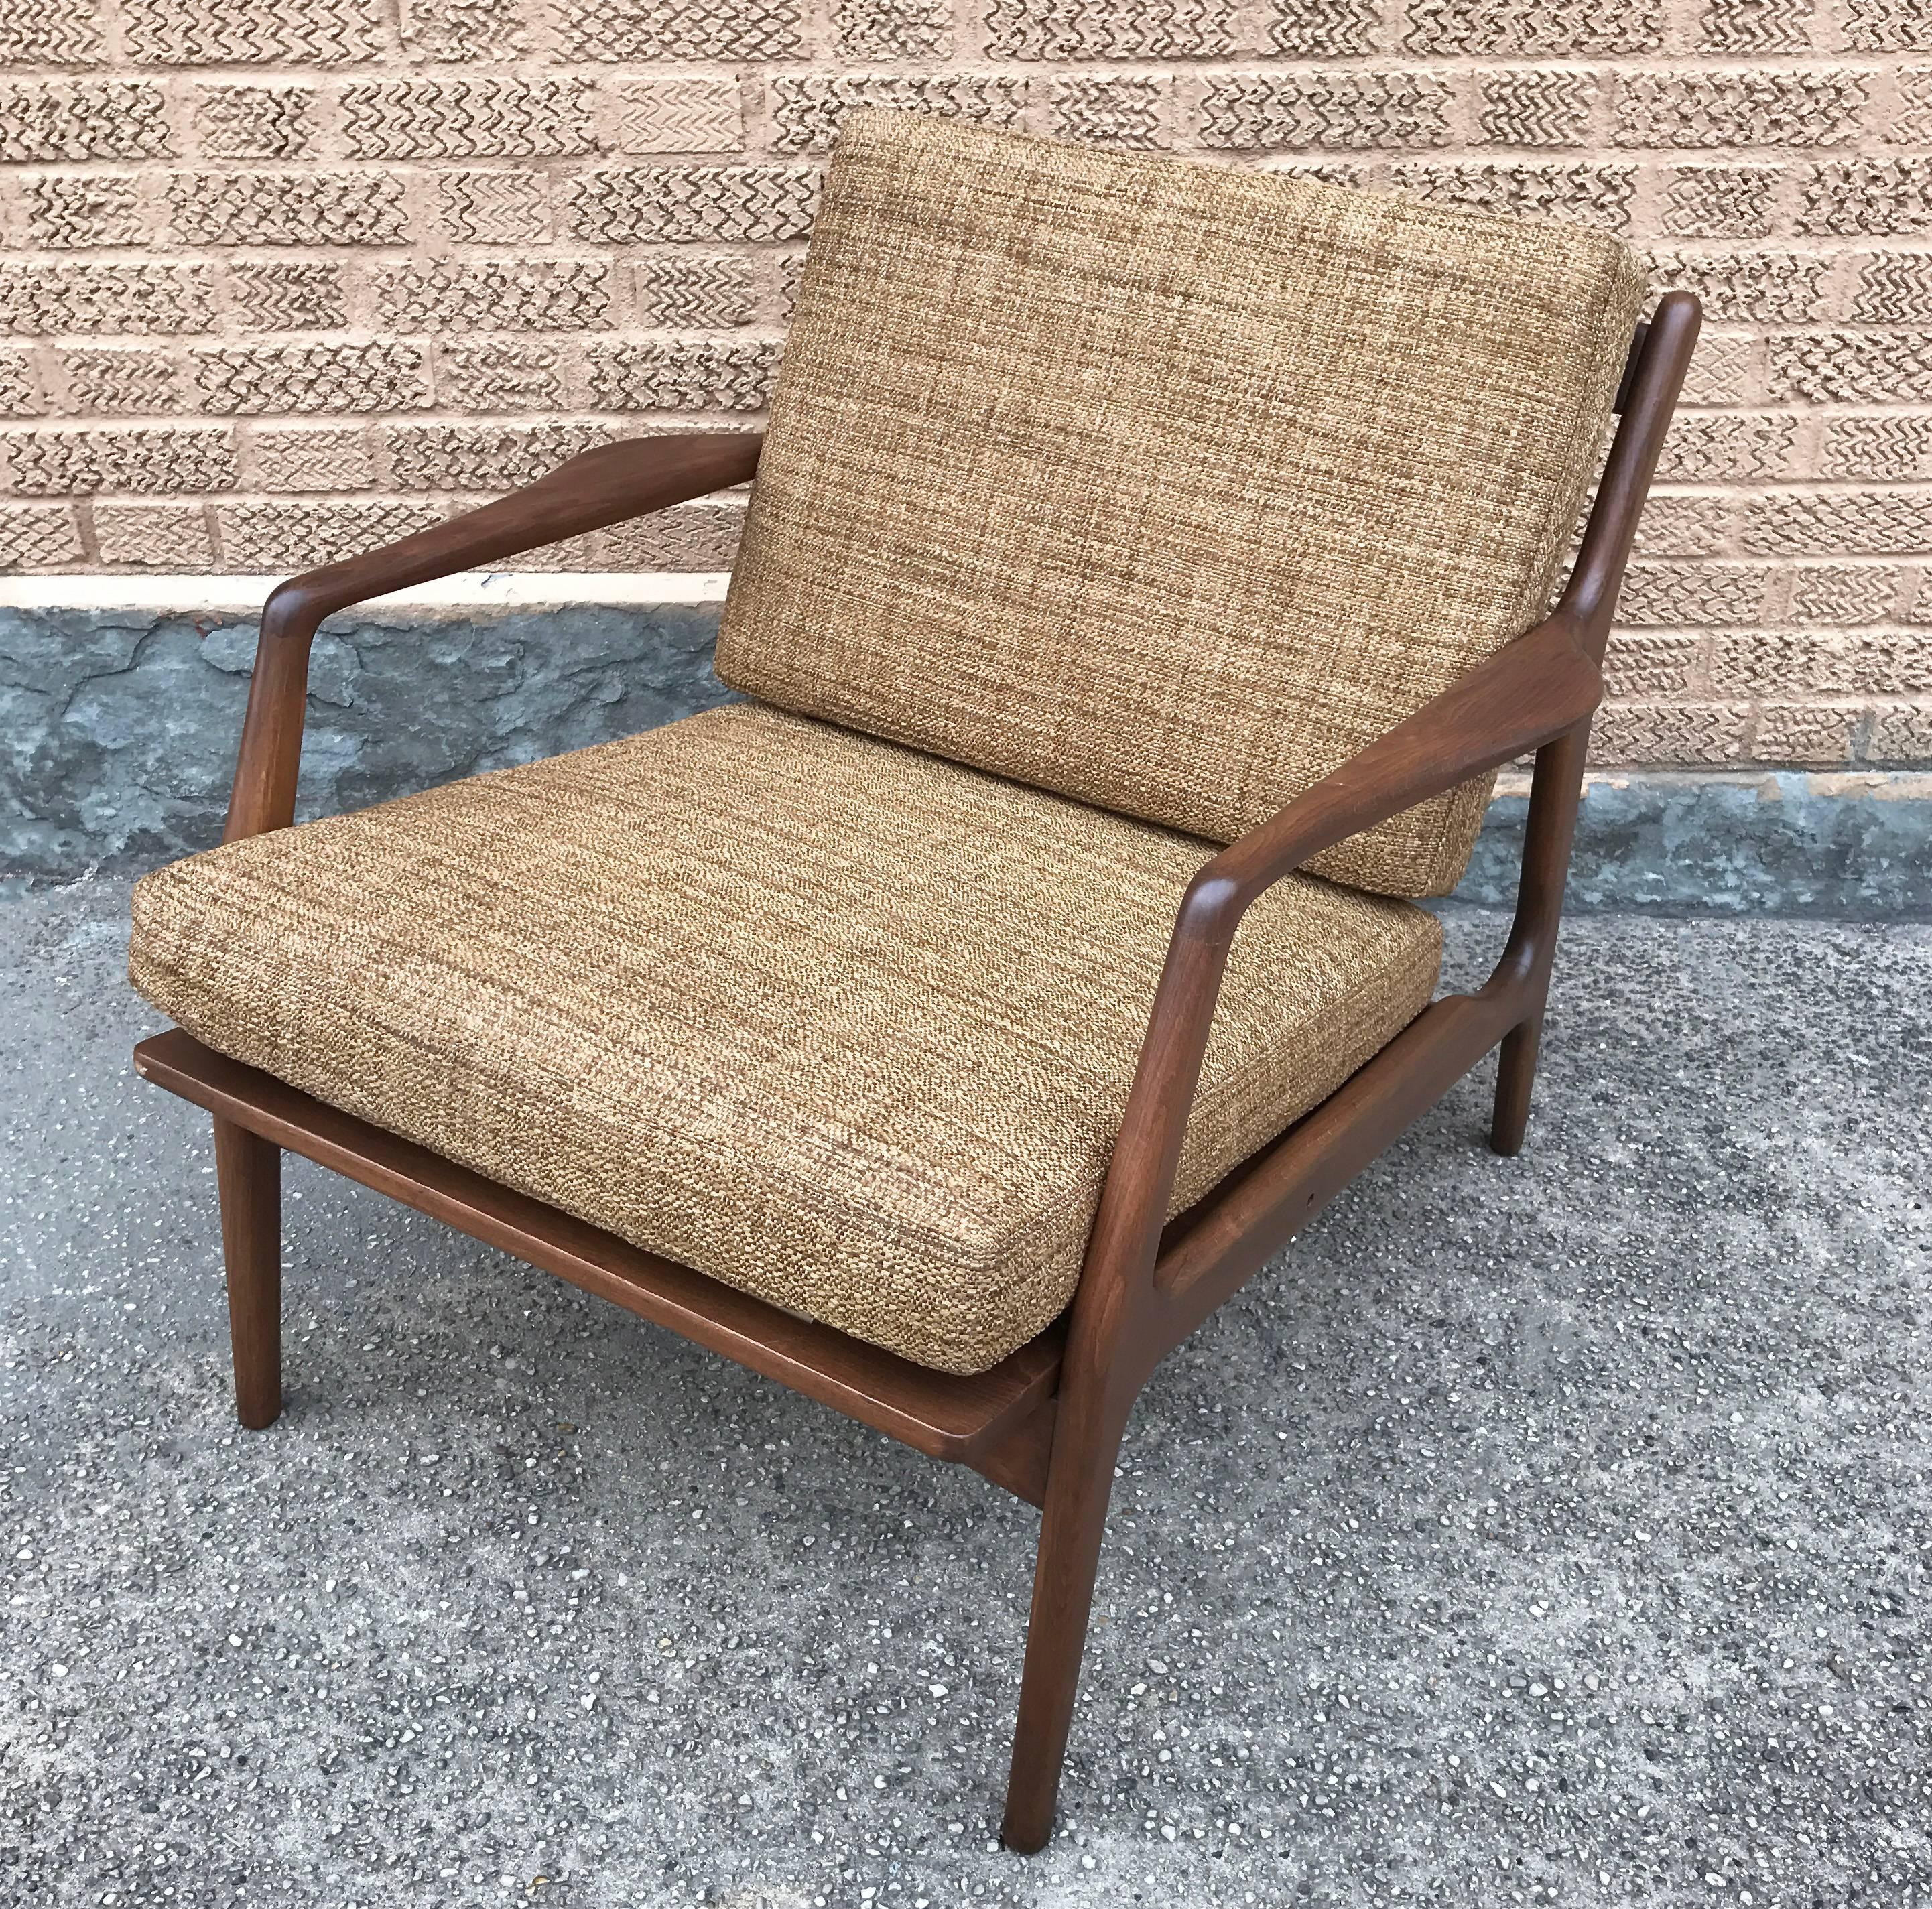 Handsome, Danish modern, lounge chair with sculptural, walnut frame by Ib Kofod-Larsen for Selig is newly restored with cushions upholstered in caramel tweed.